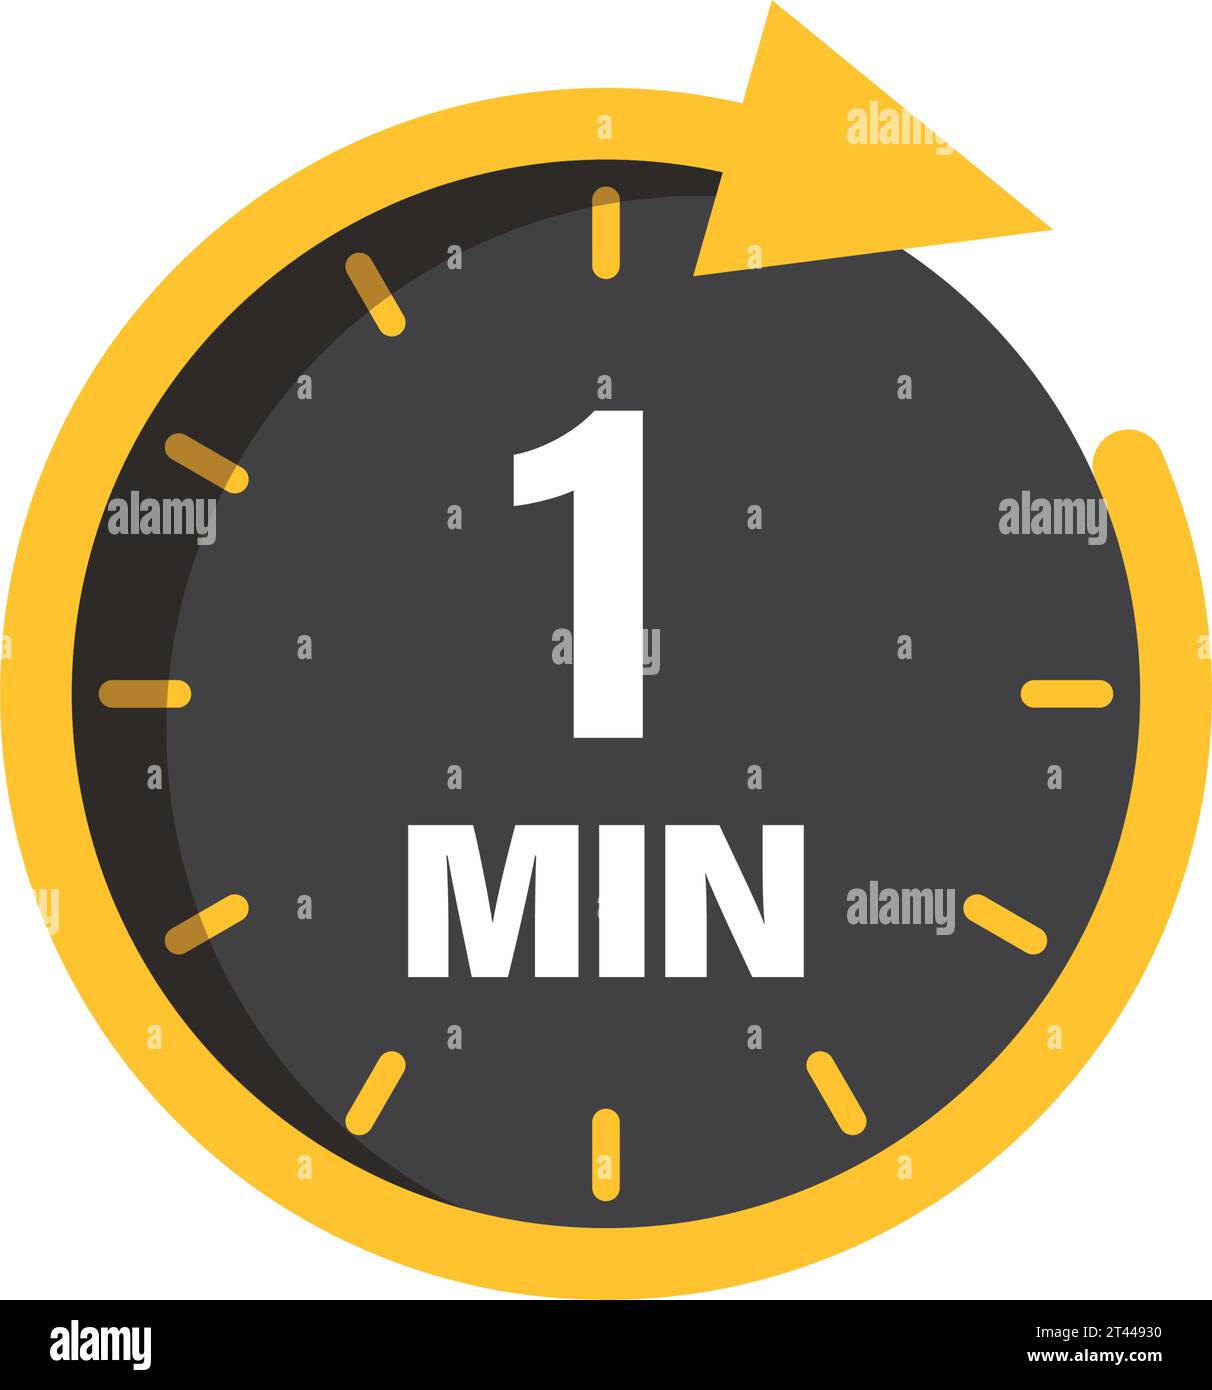 https://c8.alamy.com/comp/2T44930/1-minute-on-stopwatch-icon-in-flat-style-clock-face-timer-vector-illustration-on-isolated-background-countdown-sign-business-concept-2T44930.jpg